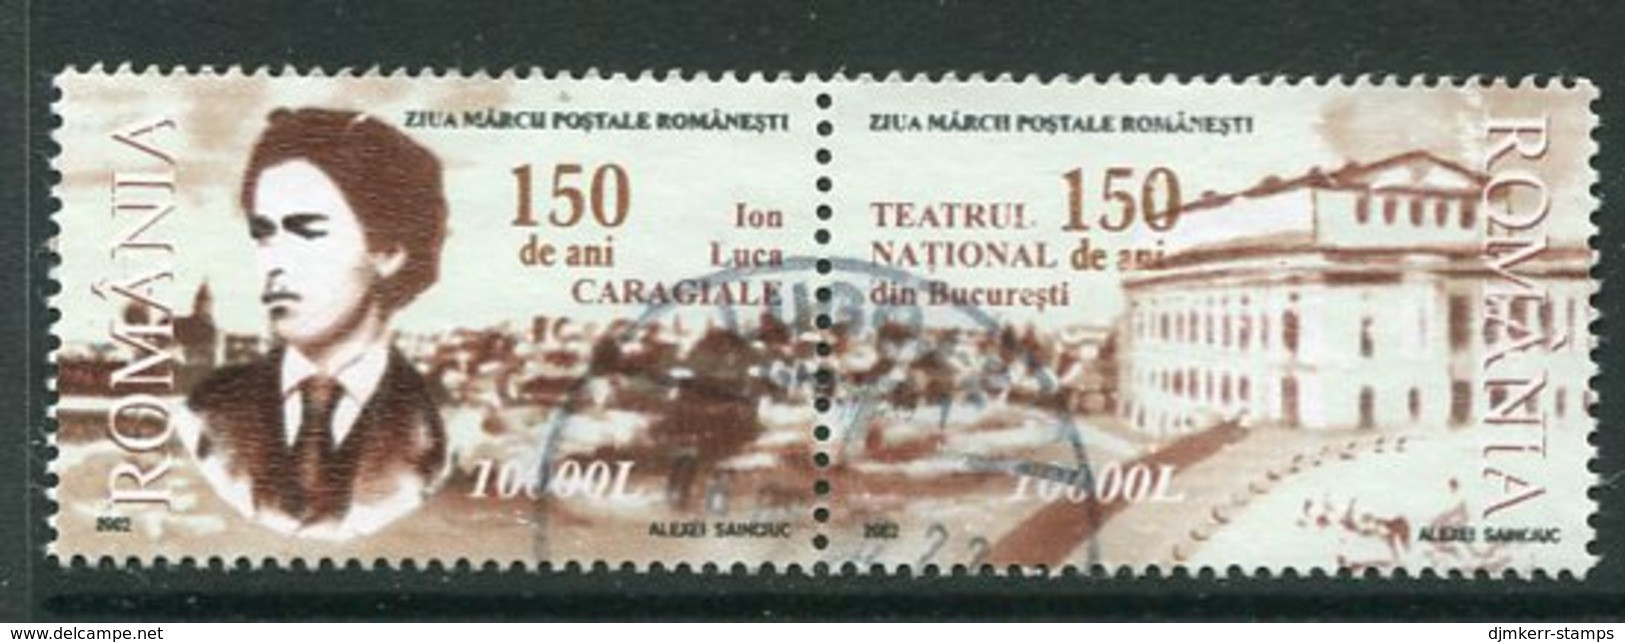 ROMANIA 2002 Caragiale Anniversary Used.  Michel 5670-71 - Used Stamps